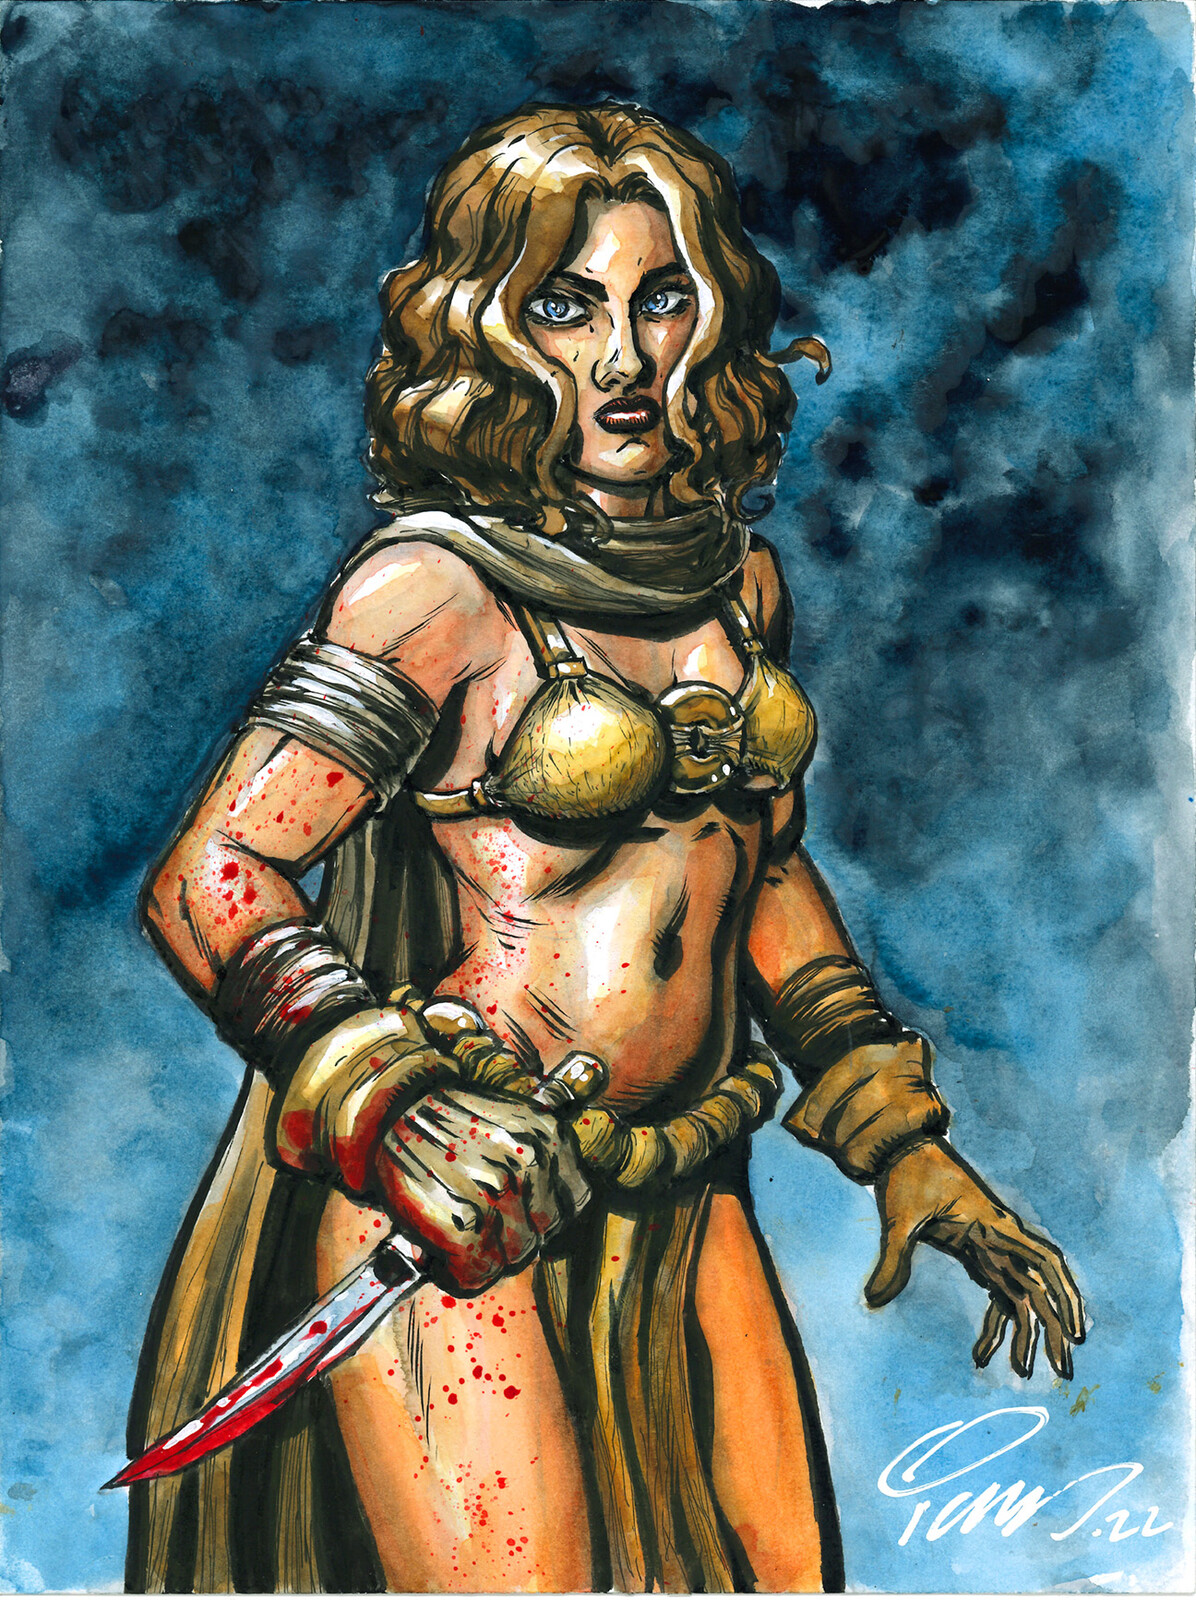 Finished scan of the piece. This is my creator-owned character, Hellena. I do a comic book called, The Axe of Hellena. 